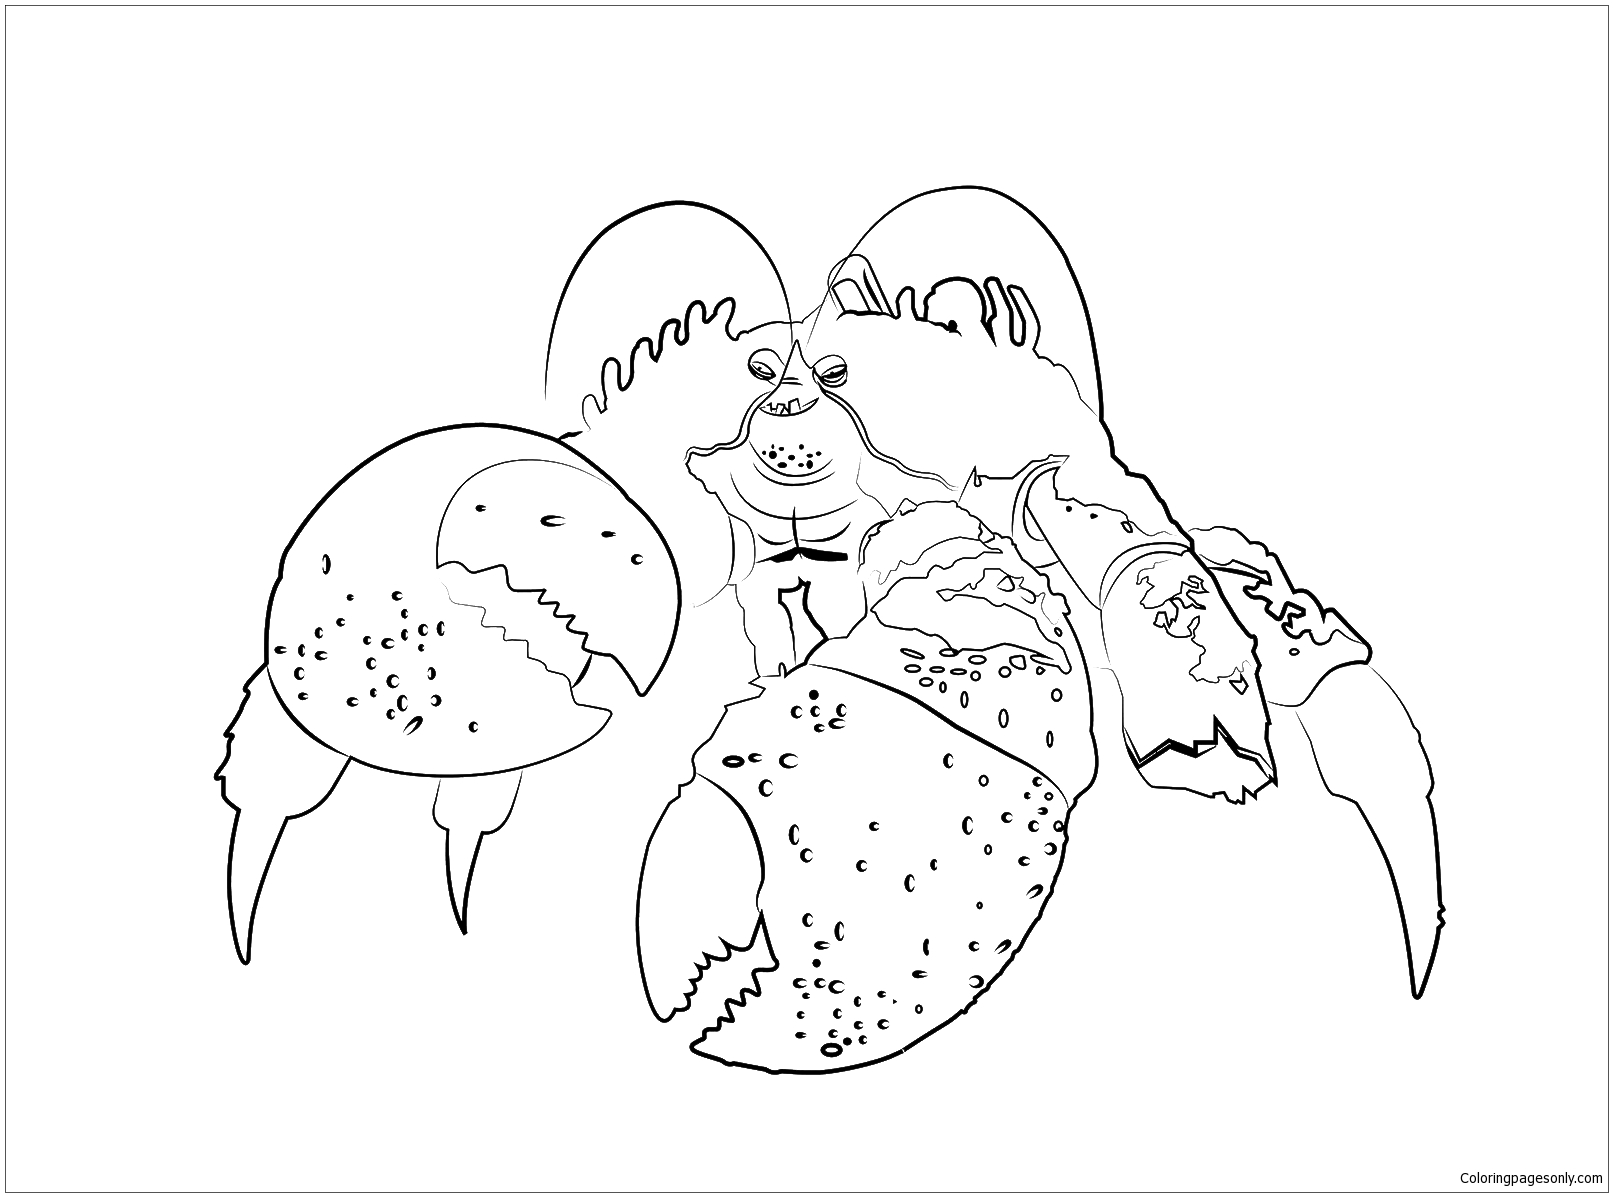 Tamatoa A Giant Coconut Crab Coloring Pages Cartoons Coloring Pages Coloring Pages For Kids And Adults